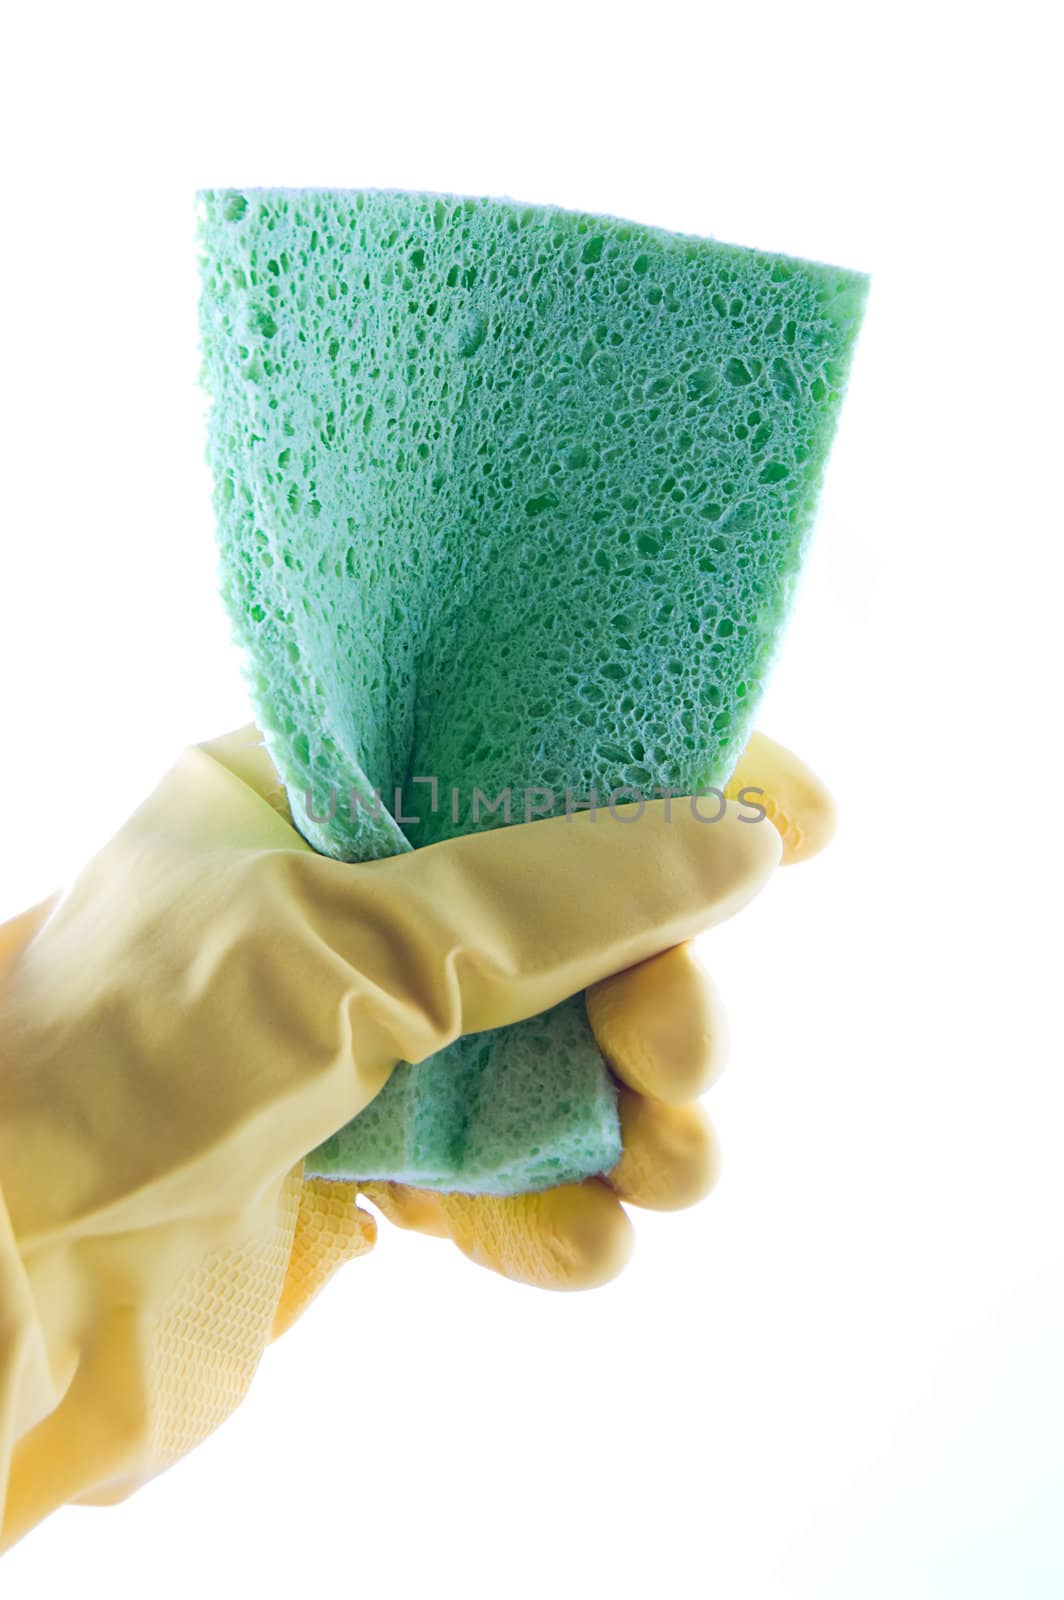 Hand in rubber glove holding green sponge by Angel_a